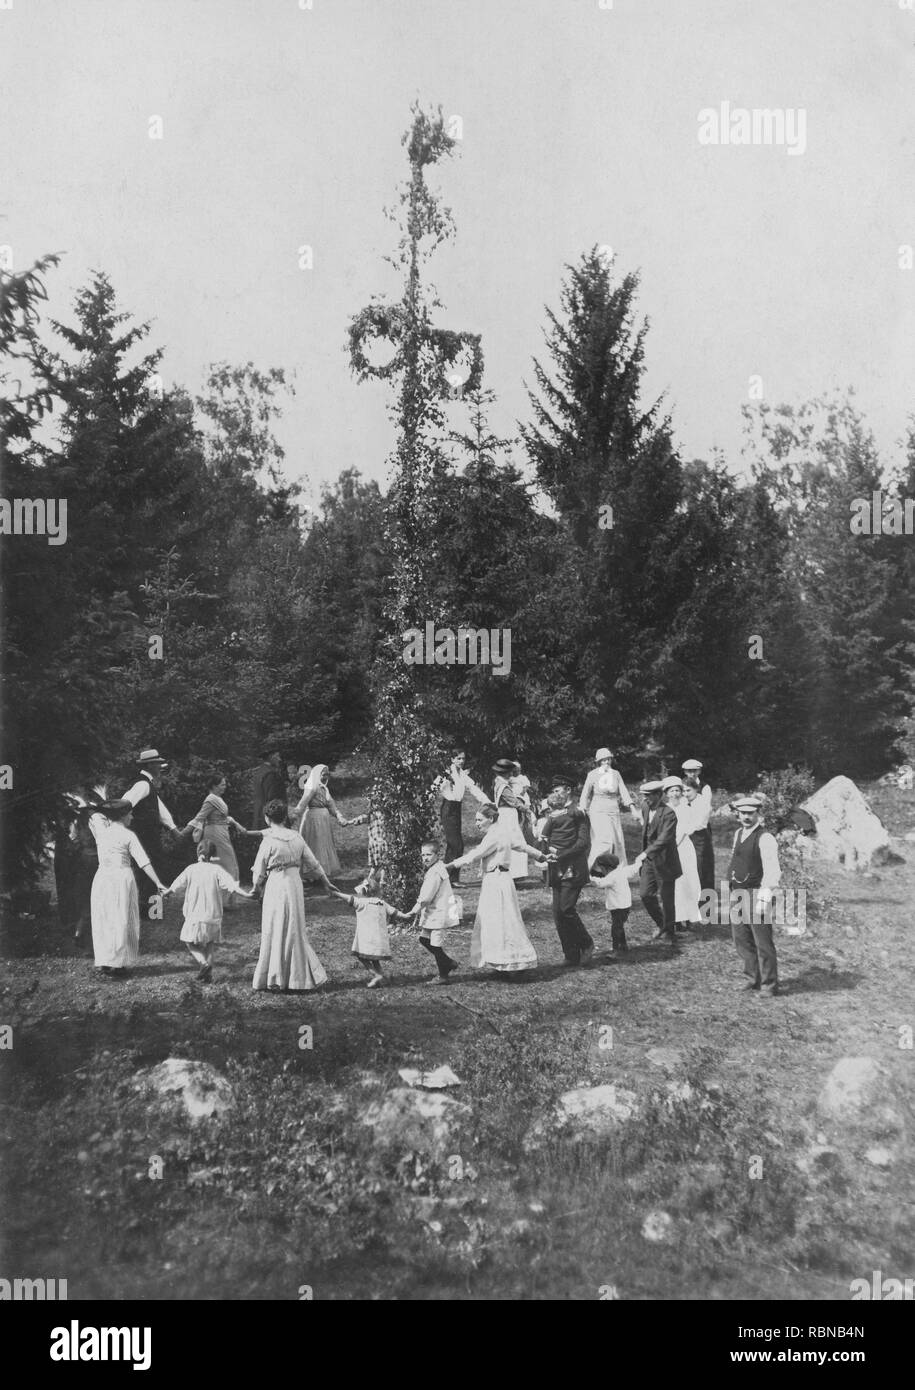 Midsummer tradition in Sweden. As a part of the festivities a Maypole is risen men, women and children gather to dance around it. Sweden at the beginning of the 20th century. Stock Photo